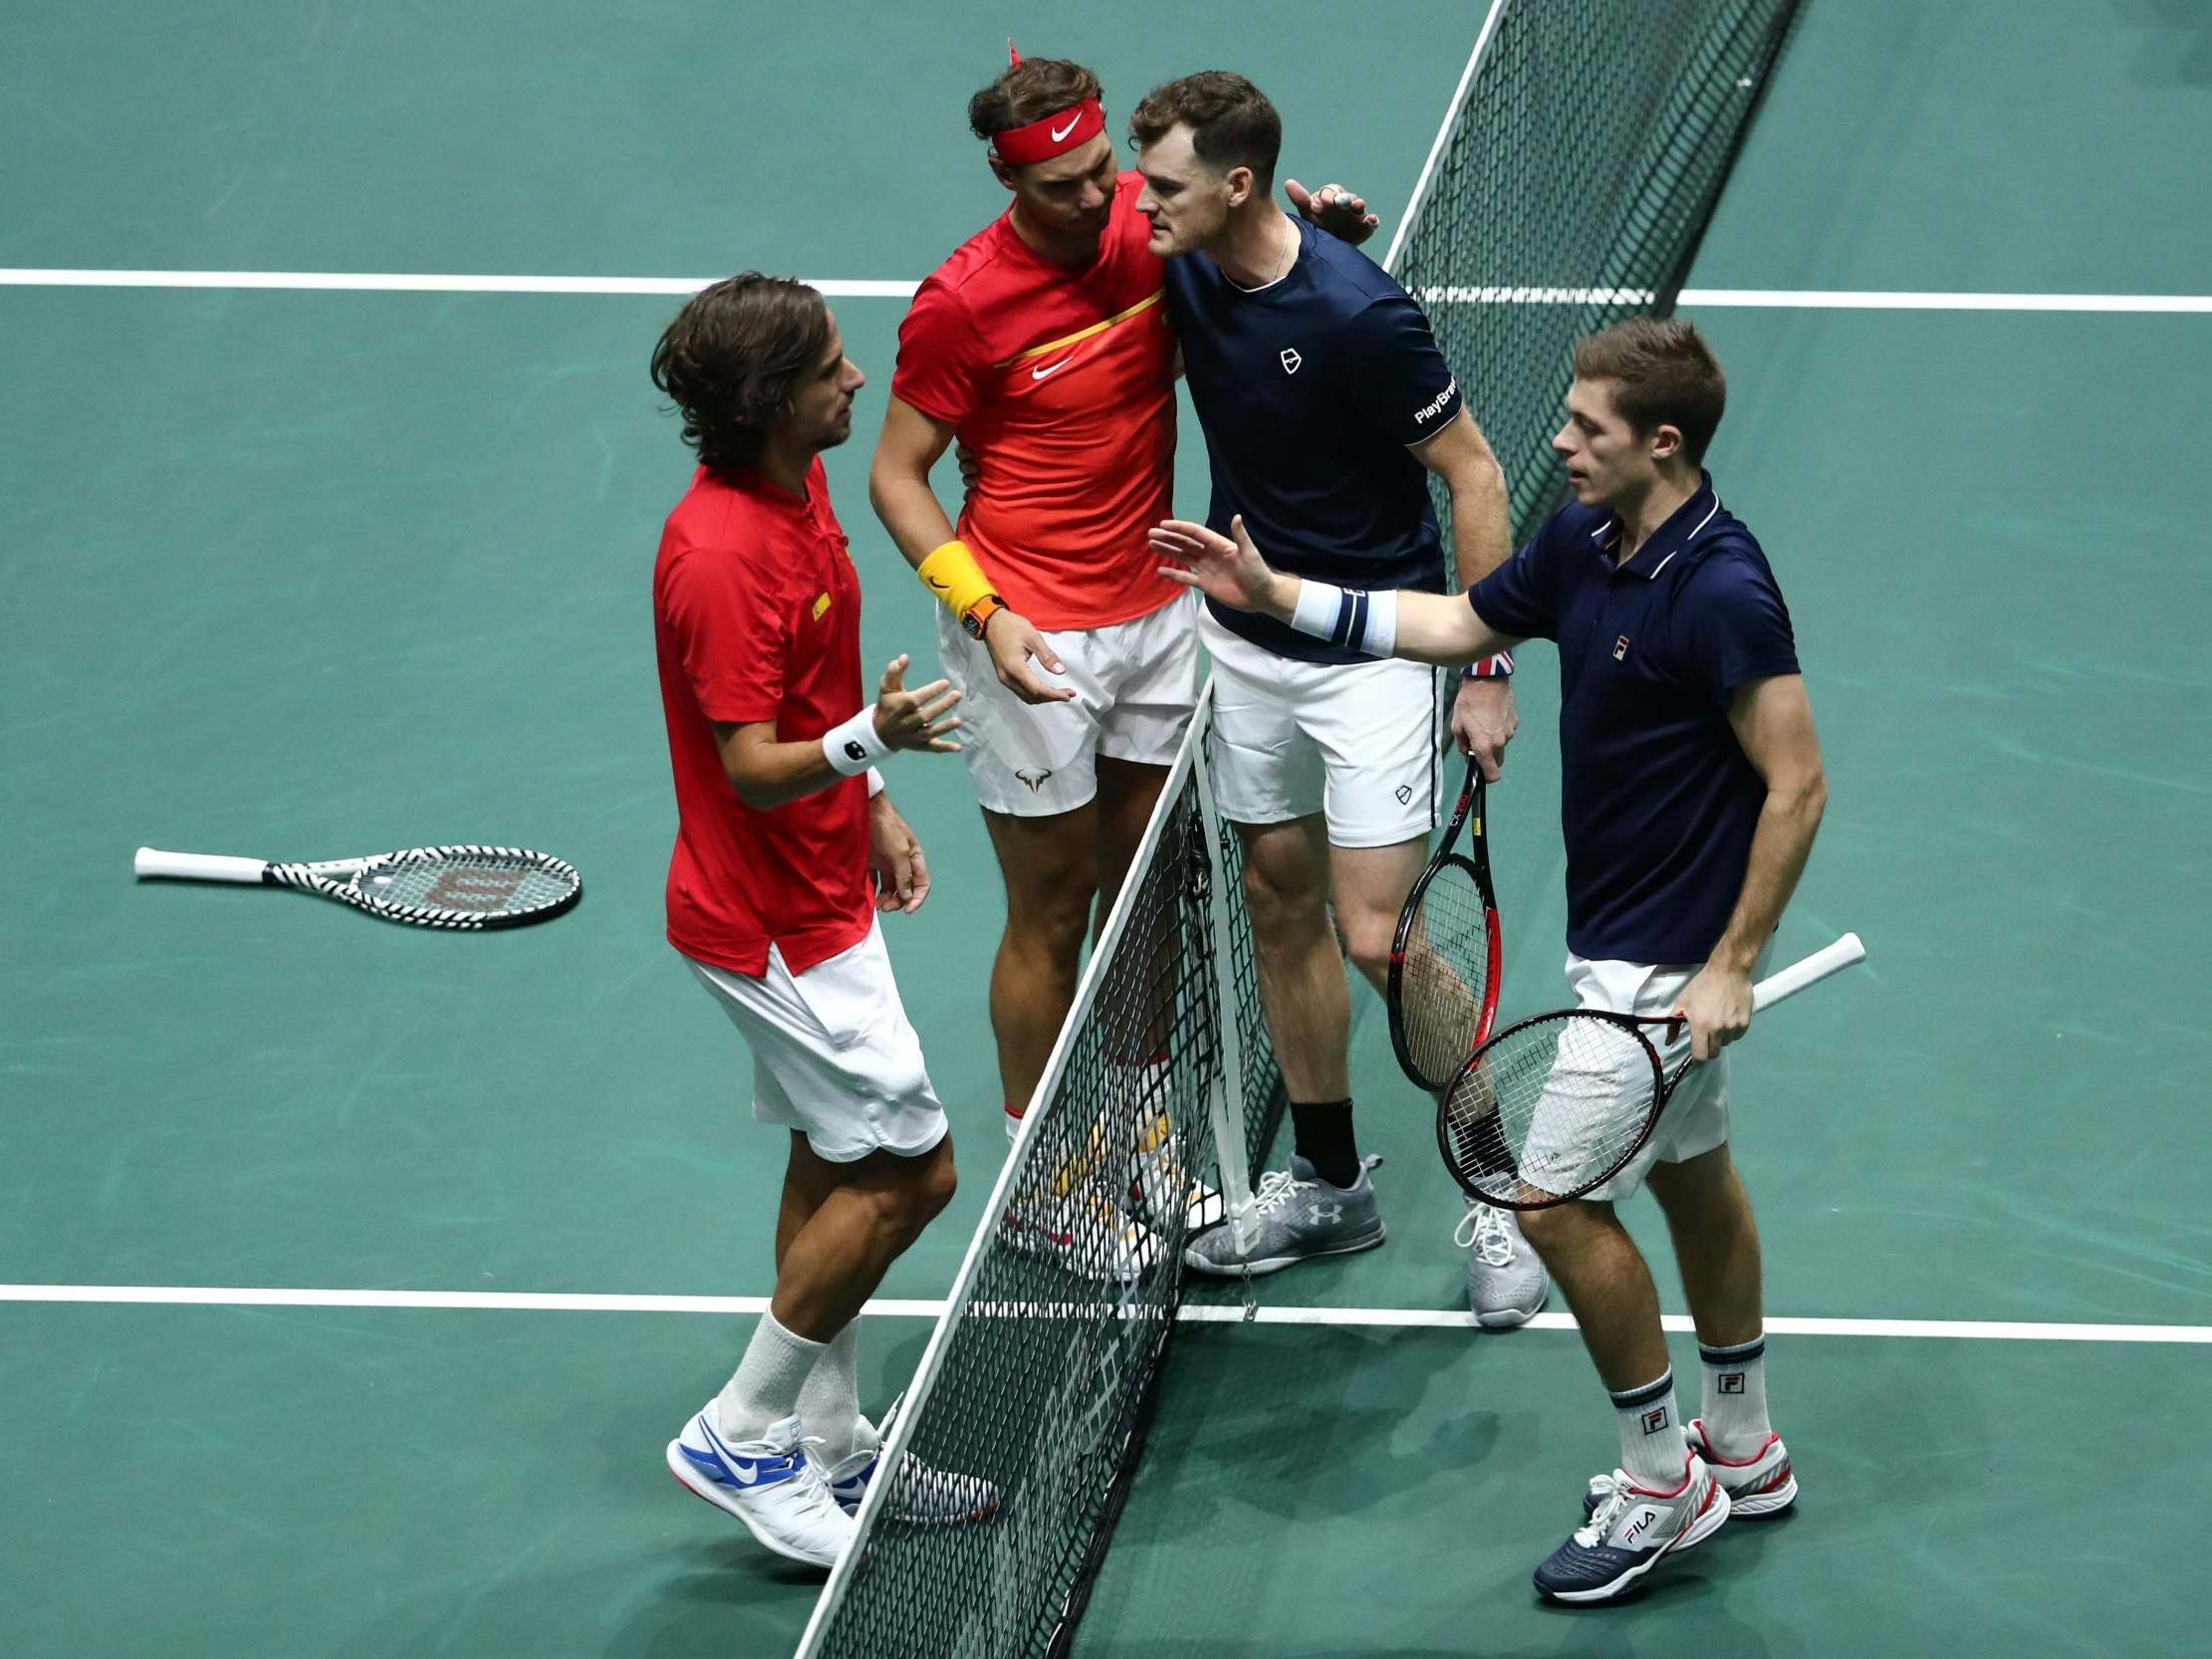 Rafael Nadal and Feliciano Lopez defeat Jamie Murray and Neal Skupski in the deciding doubles